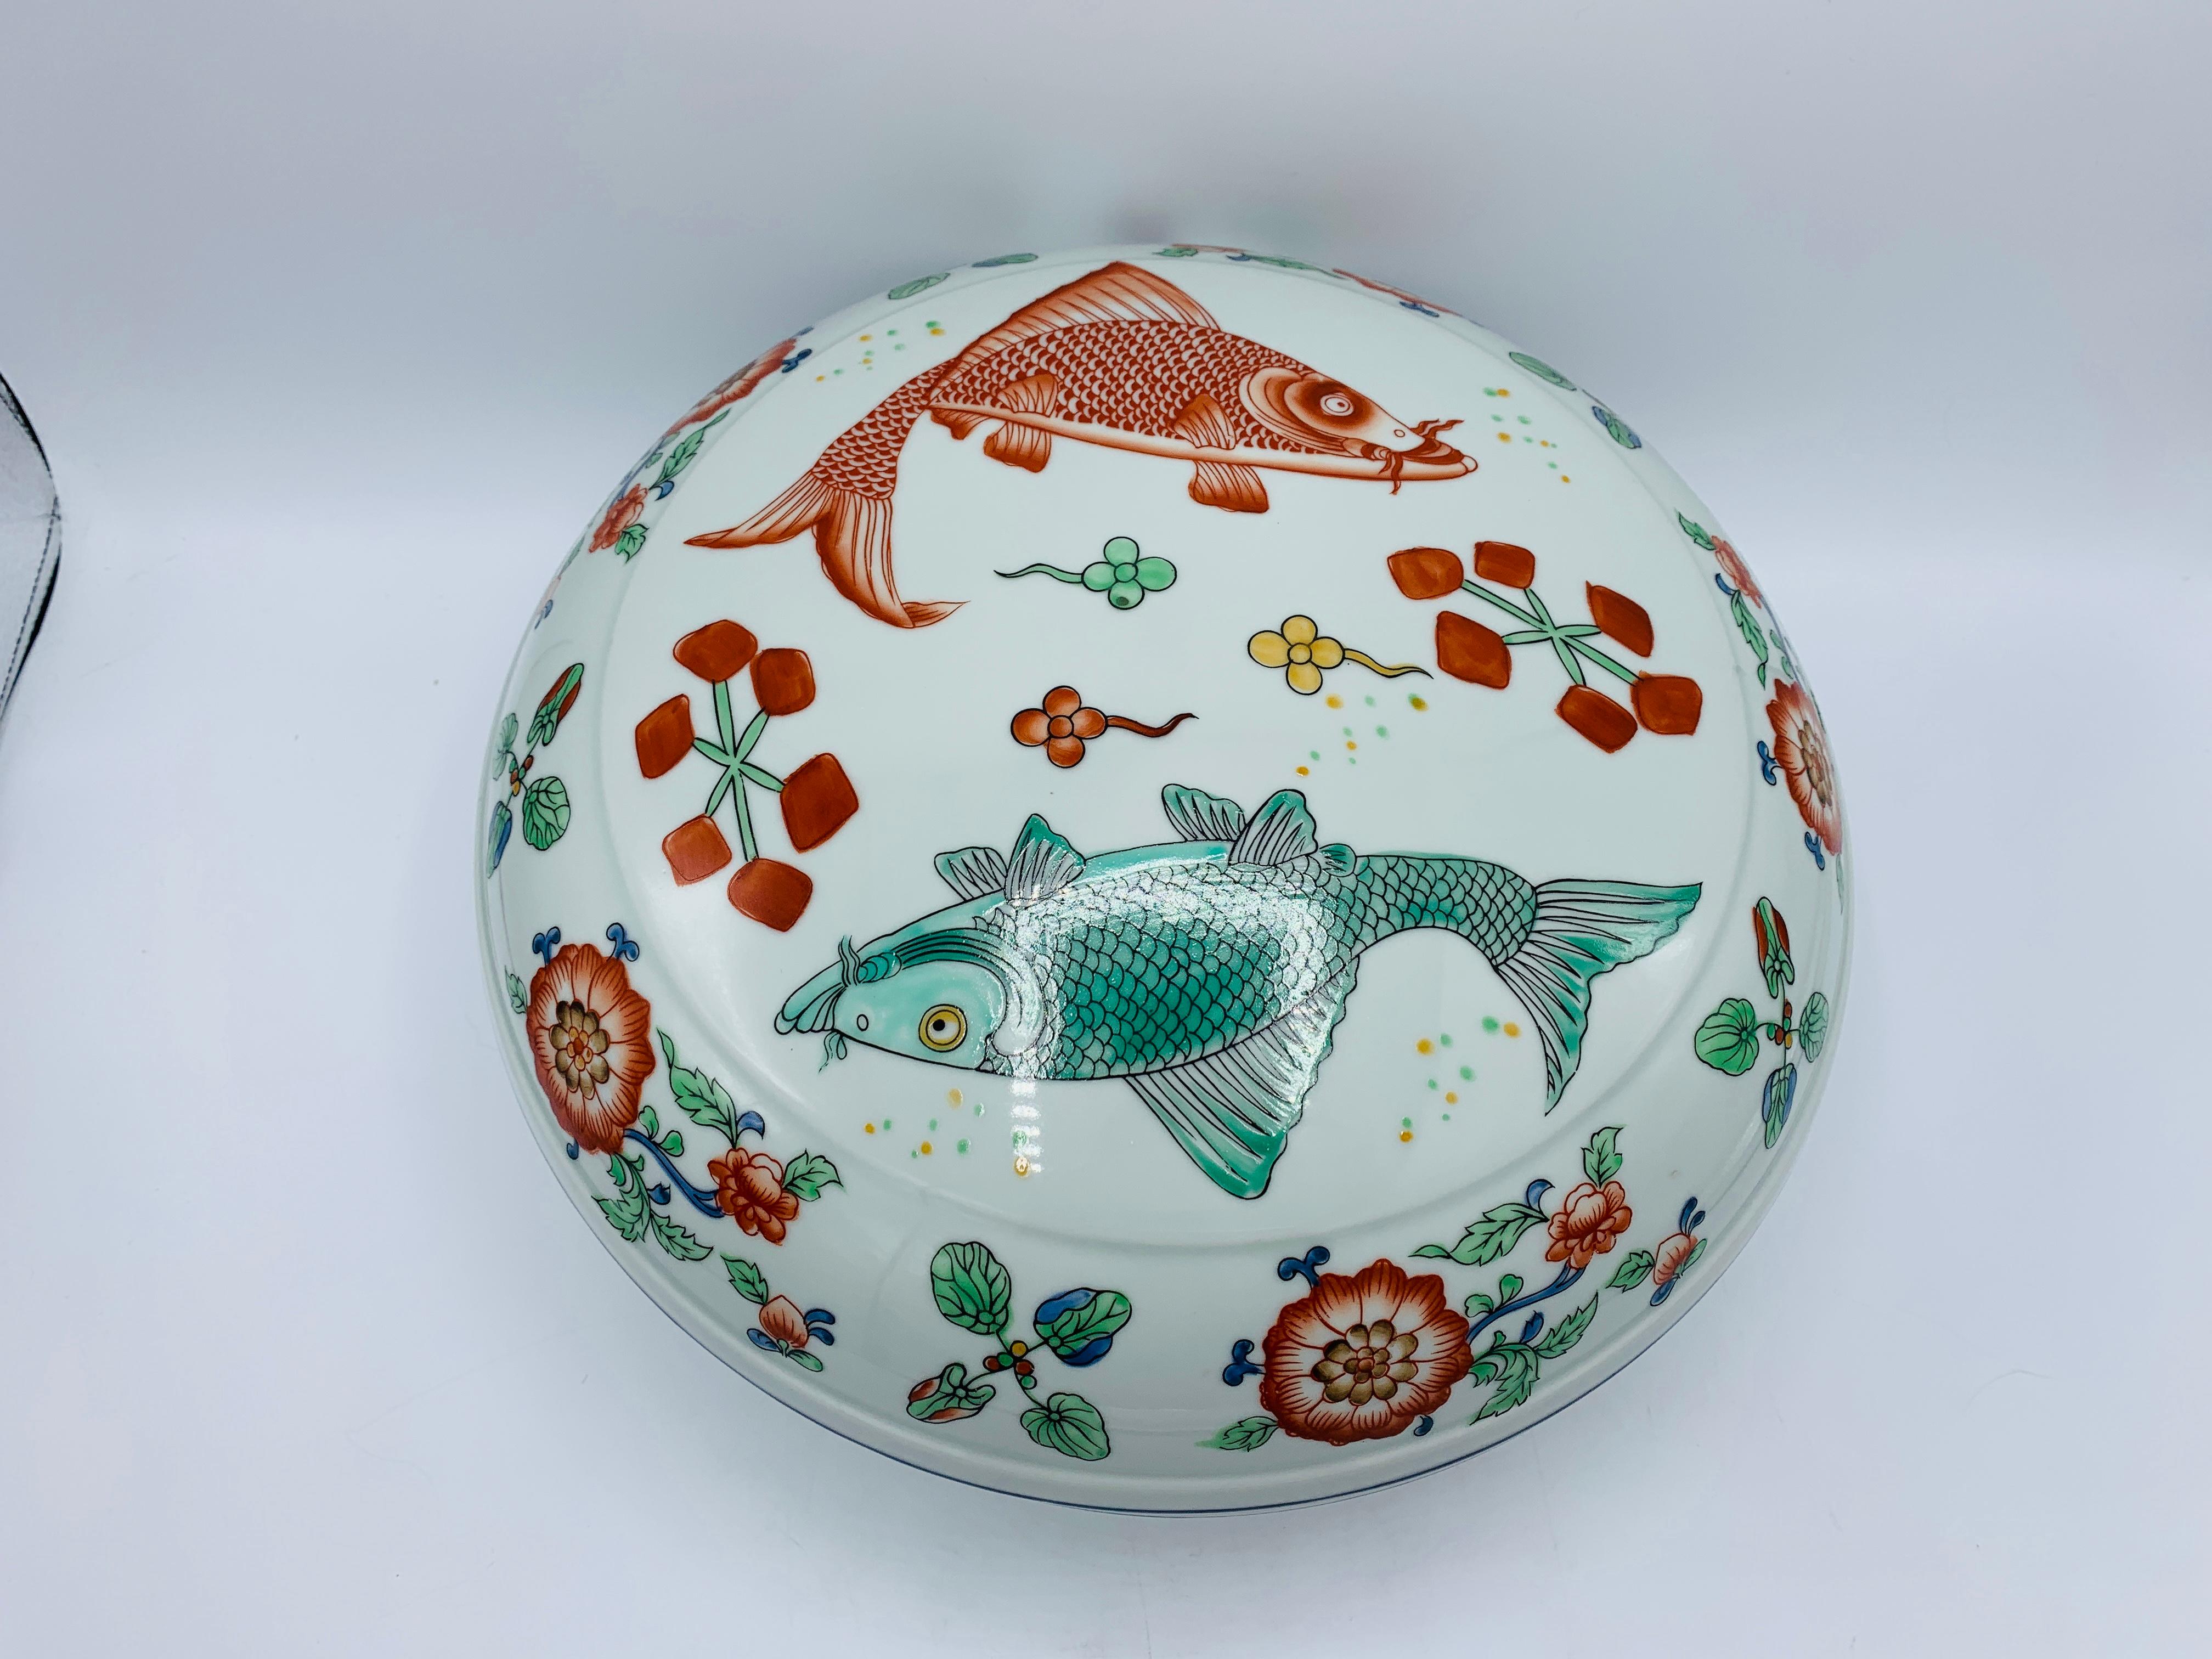 1960s Porcelain Lidded Bowl with Chinoiserie Fish Motif In Good Condition For Sale In Richmond, VA